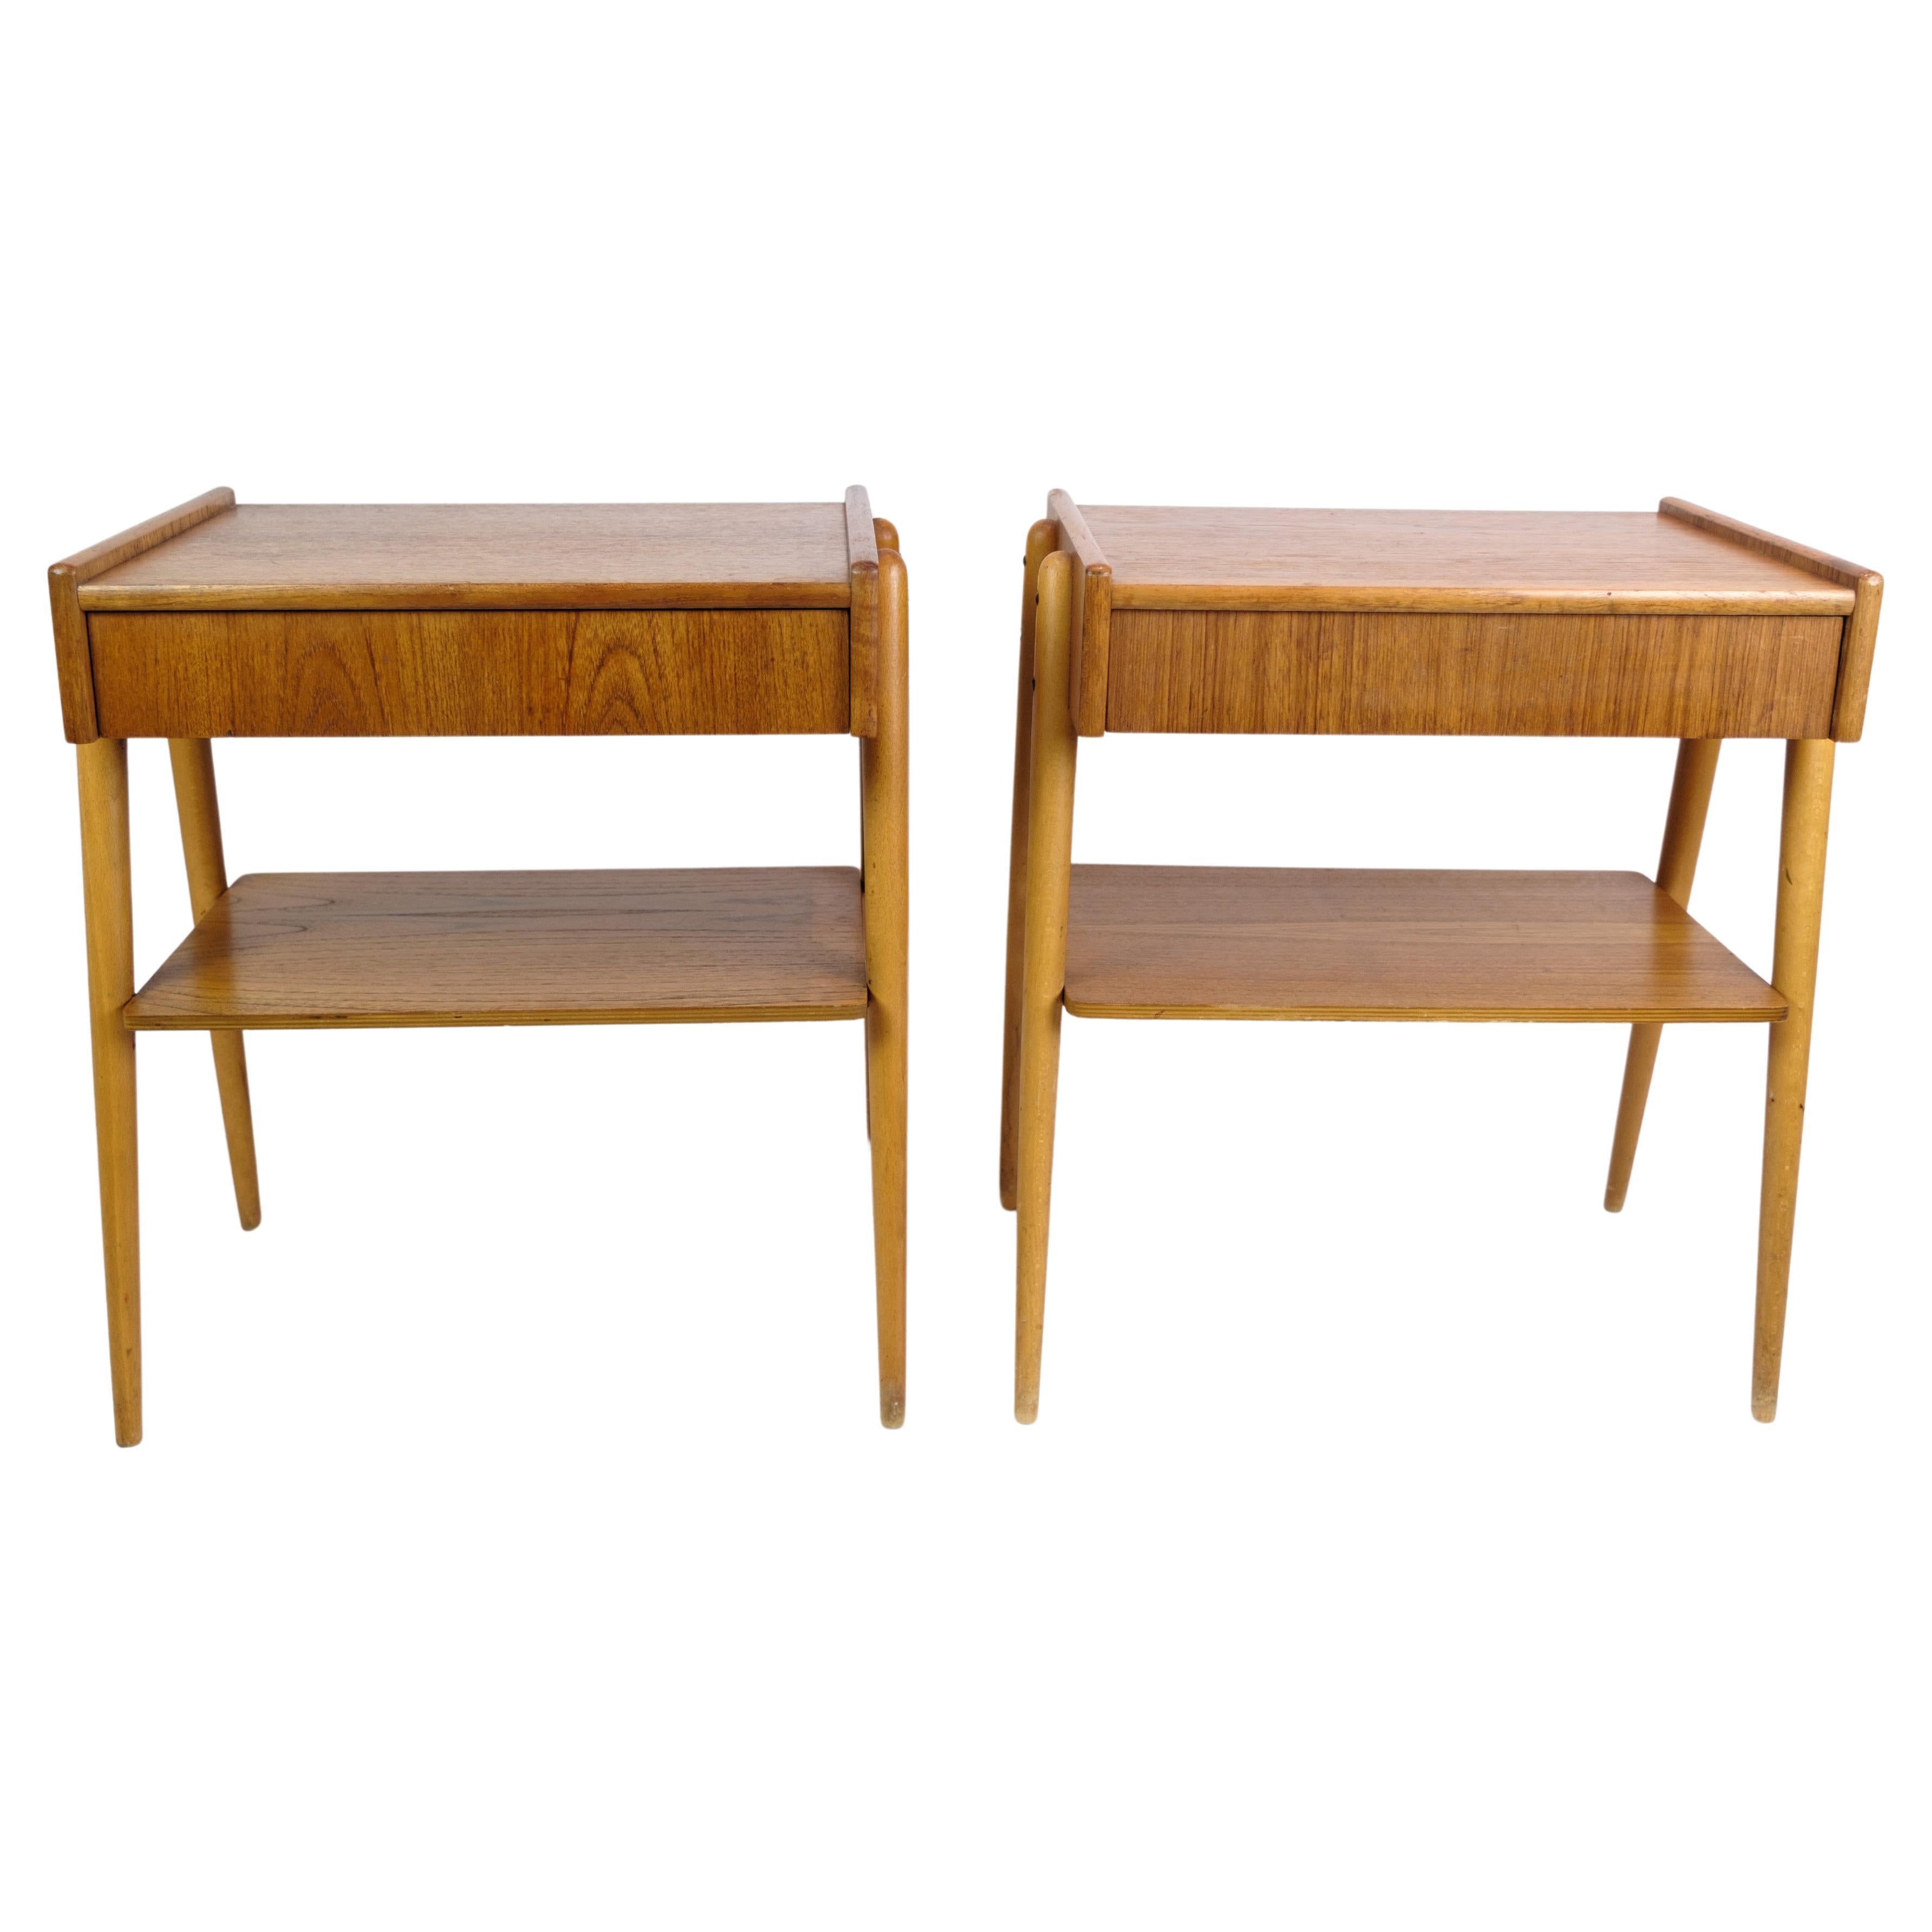 Set of Nightstands In Teak, By AB Carlström & Co Furniture Factory From 1950s For Sale